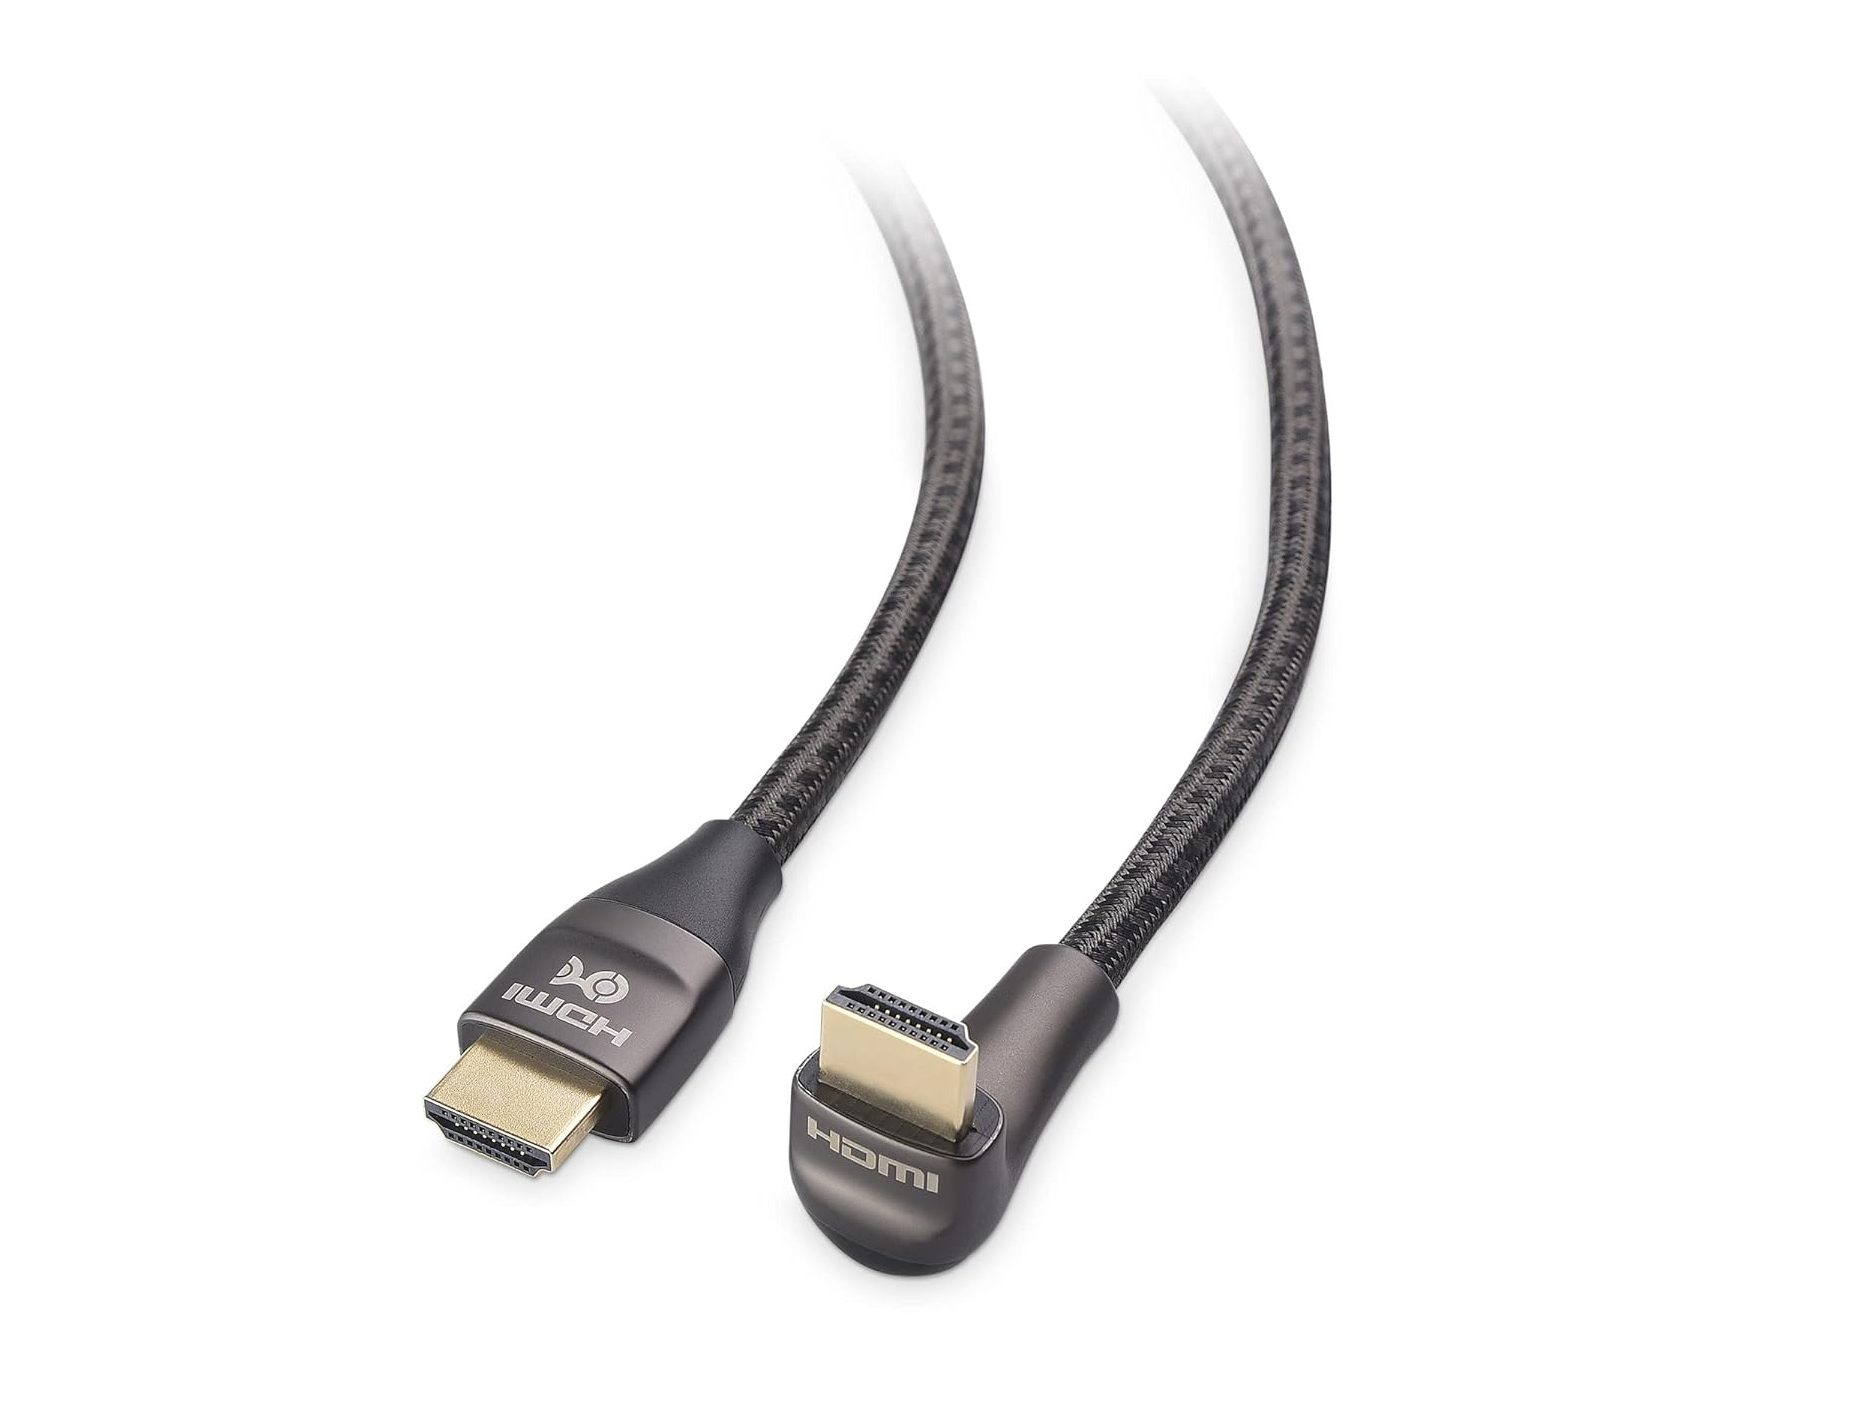 AudioQuest  What Is The Best HDMI Cable For You? 